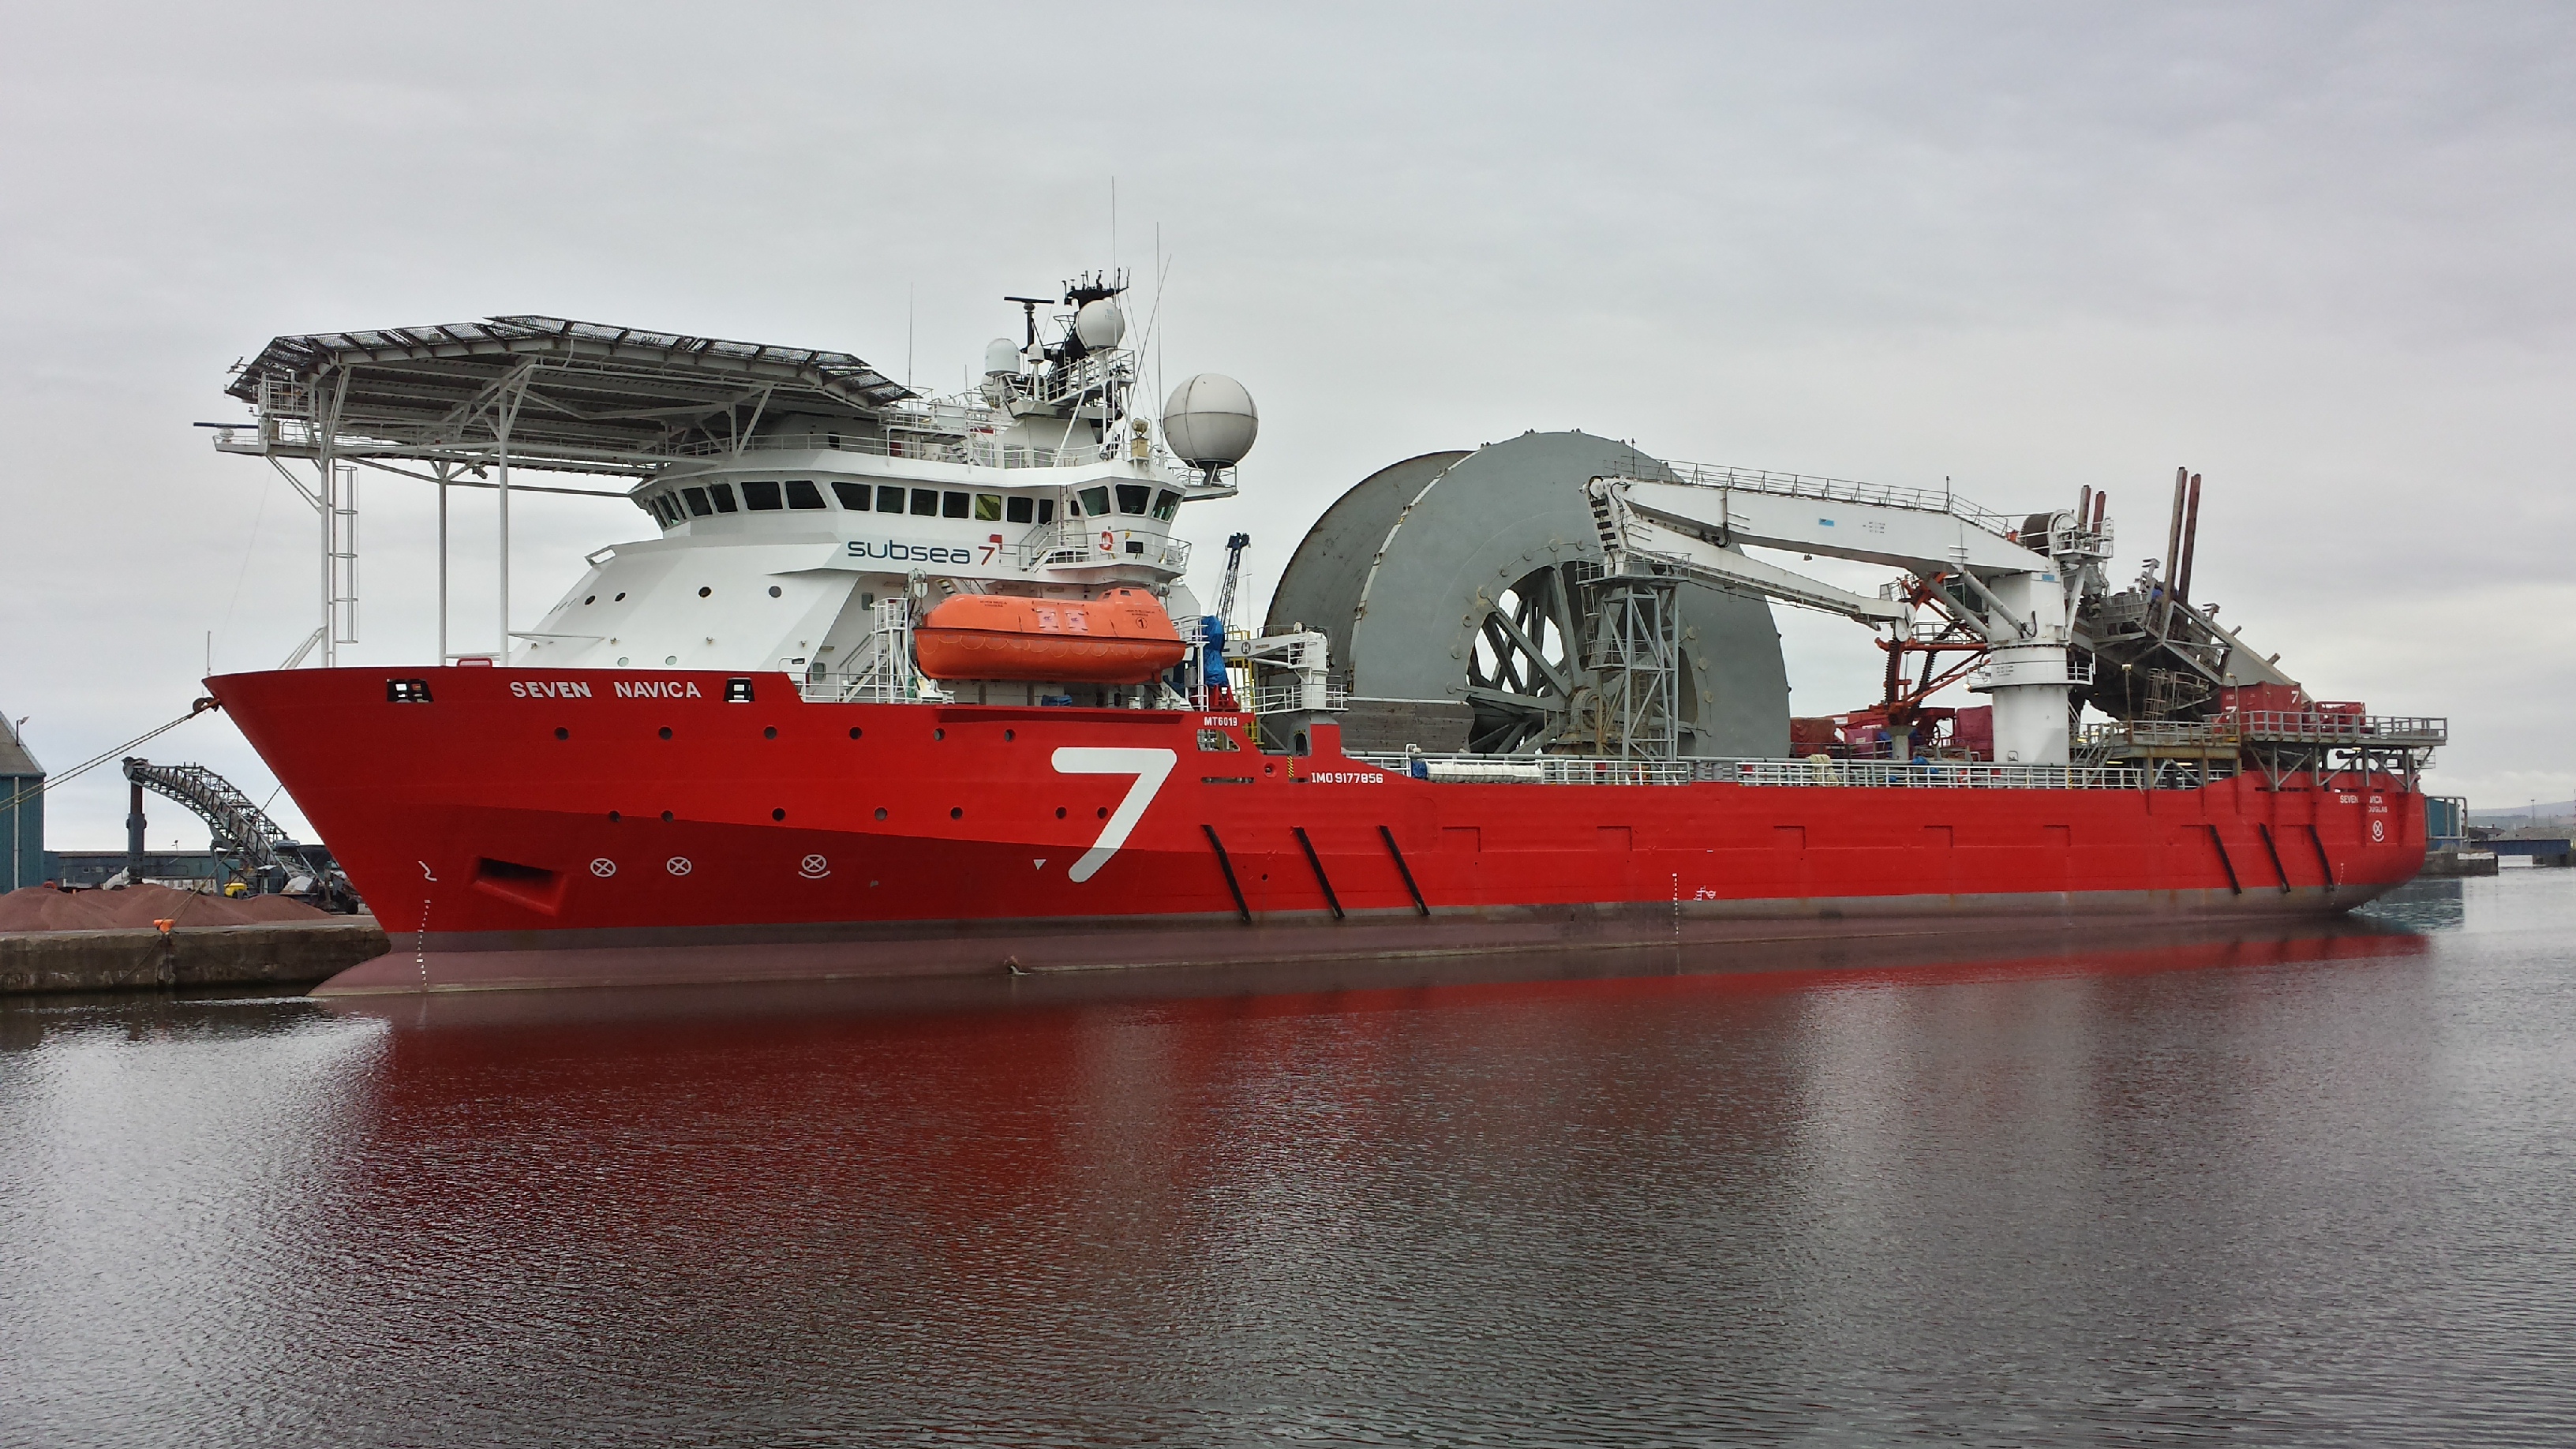 Free download wallpaper Ship, Vehicles, Offshore Support Vessel, Seven Navica on your PC desktop